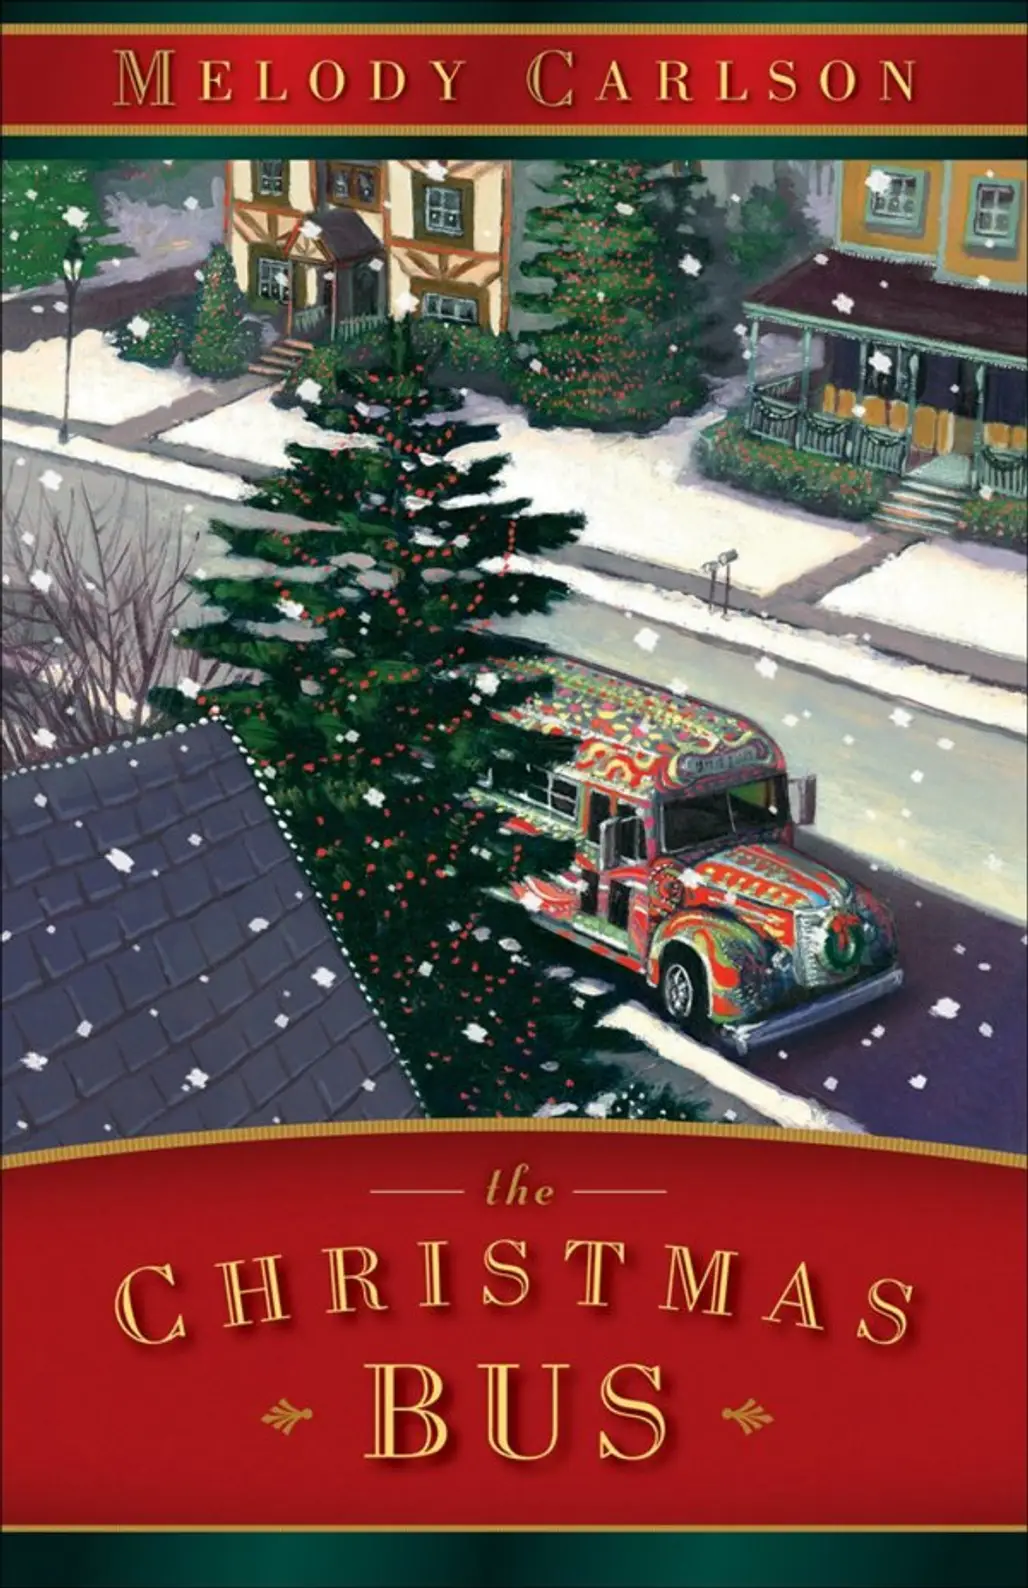 The Christmas Bus by Melody Carlson